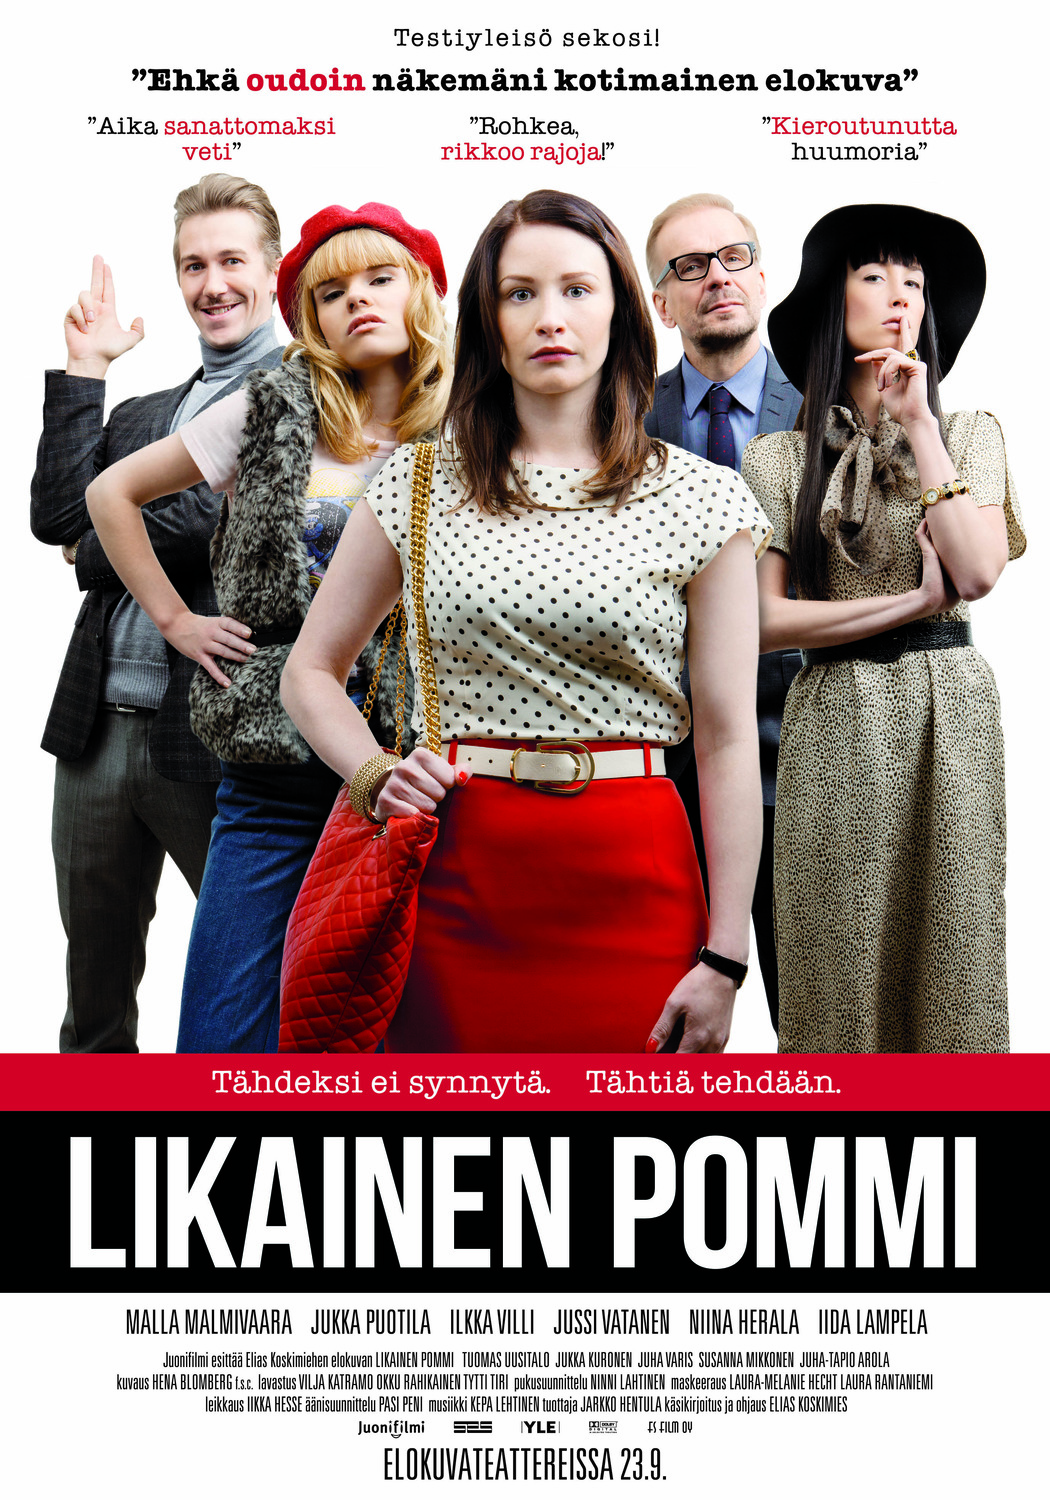 Extra Large Movie Poster Image for Likainen pommi 